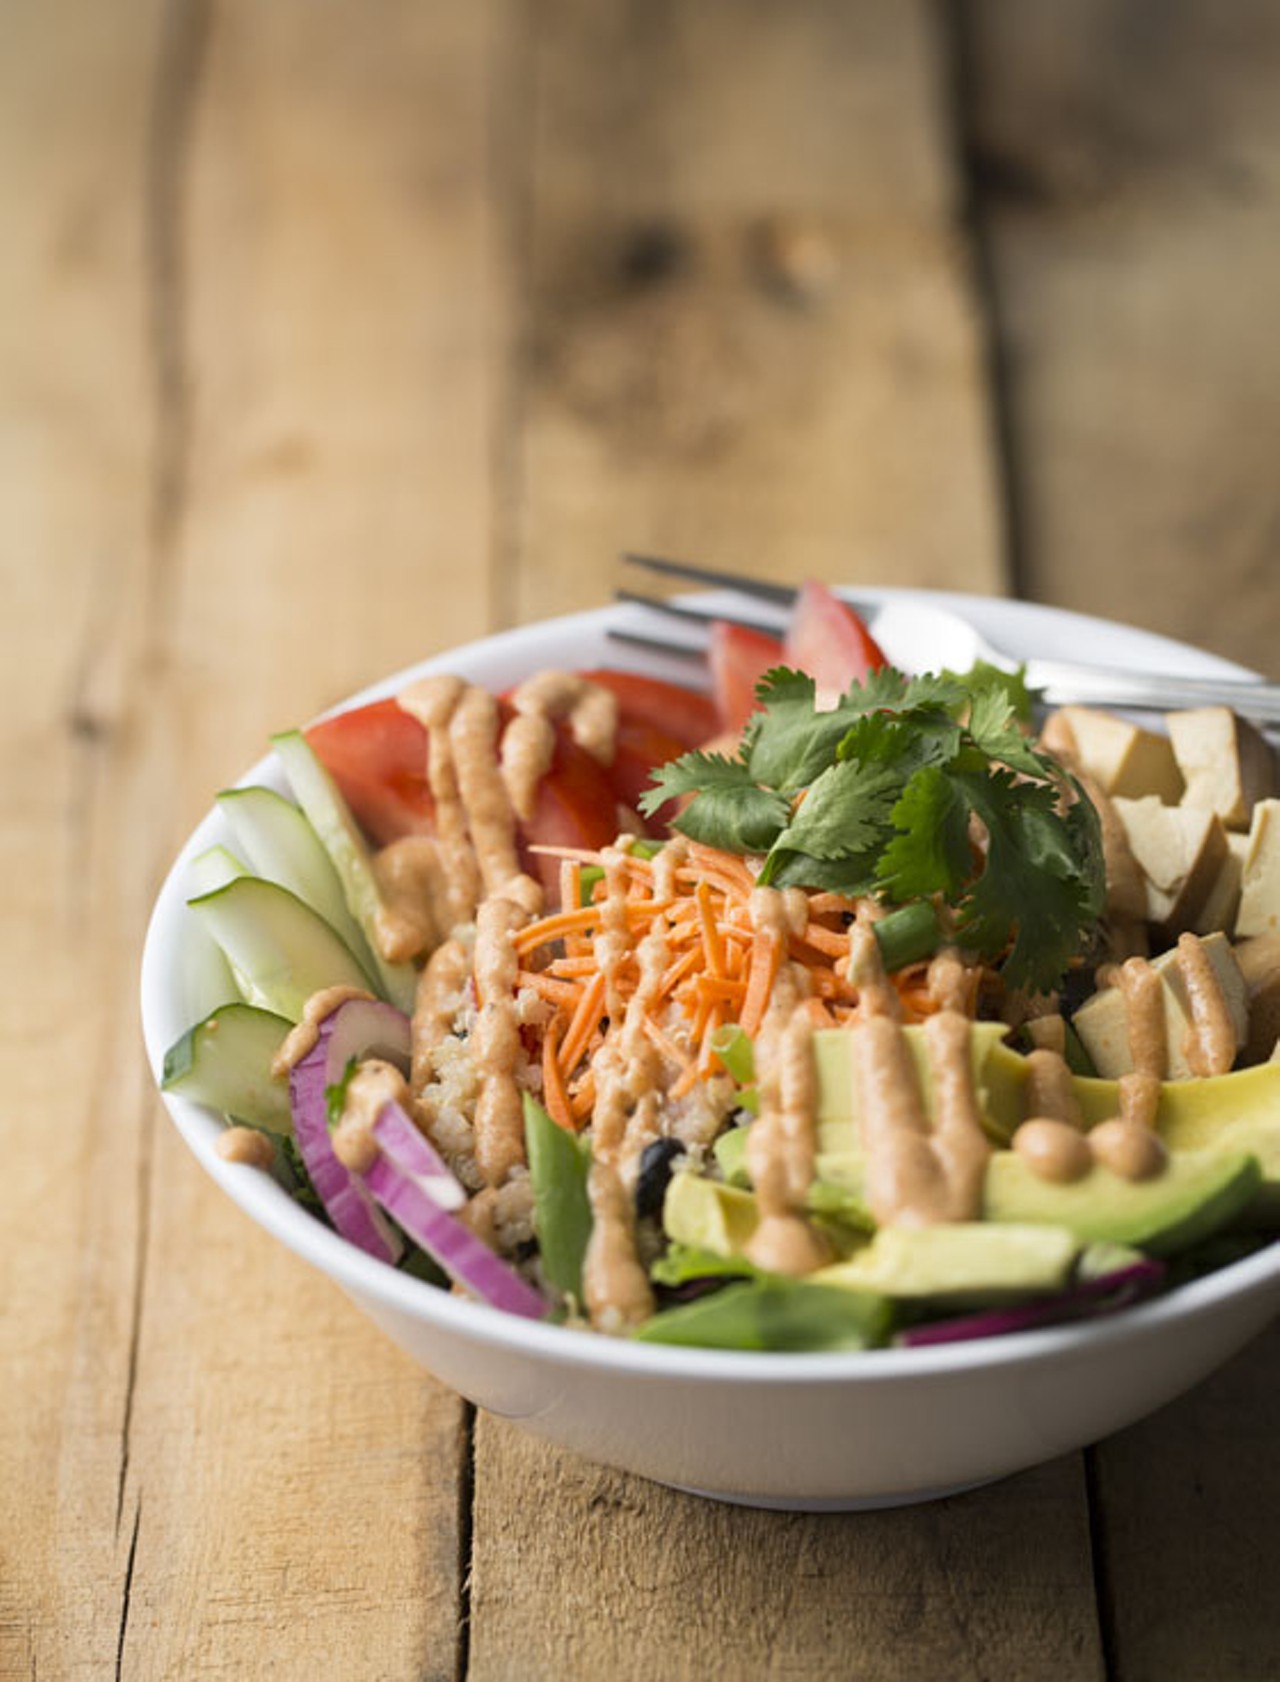 The "Power Protein Bowl" is a quinoa salad with organic marinated tofu, greens, cucumber, red onion, shredded carrot, tomato and fresh avocado with spicy chipotle sauce.